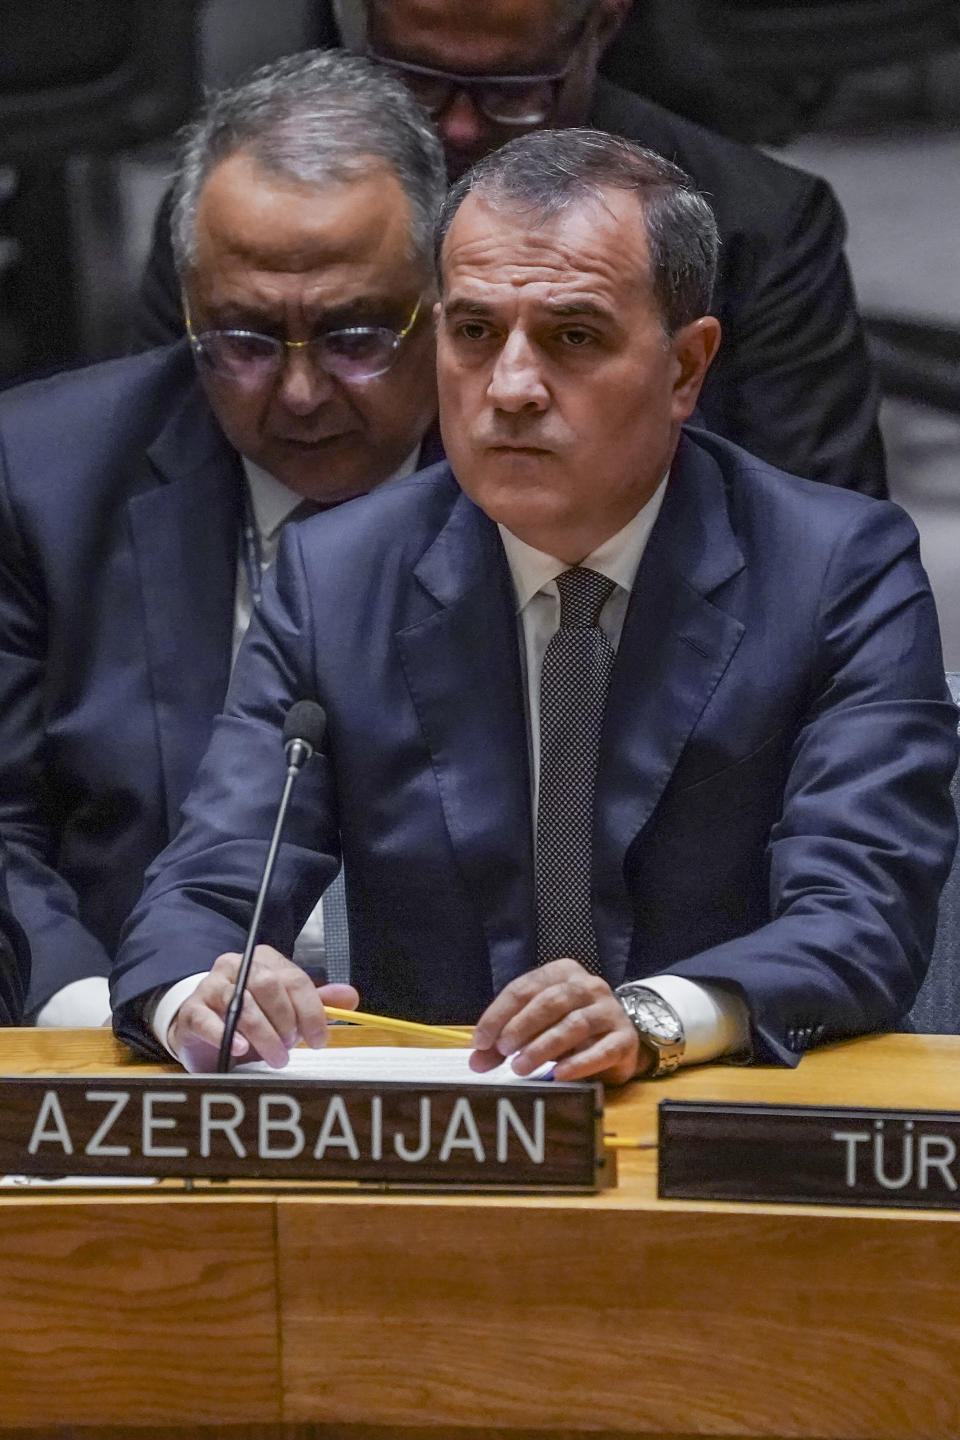 Azerbaijan's Foreign Minister Jeyhun Bayramov prepares to address a United Nations Security Council meeting, on the conflict between Armenia and Azerbaijan, Thursday Sept. 21, 2023 at U.N. headquarters. (AP Photo/Bebeto Matthews)